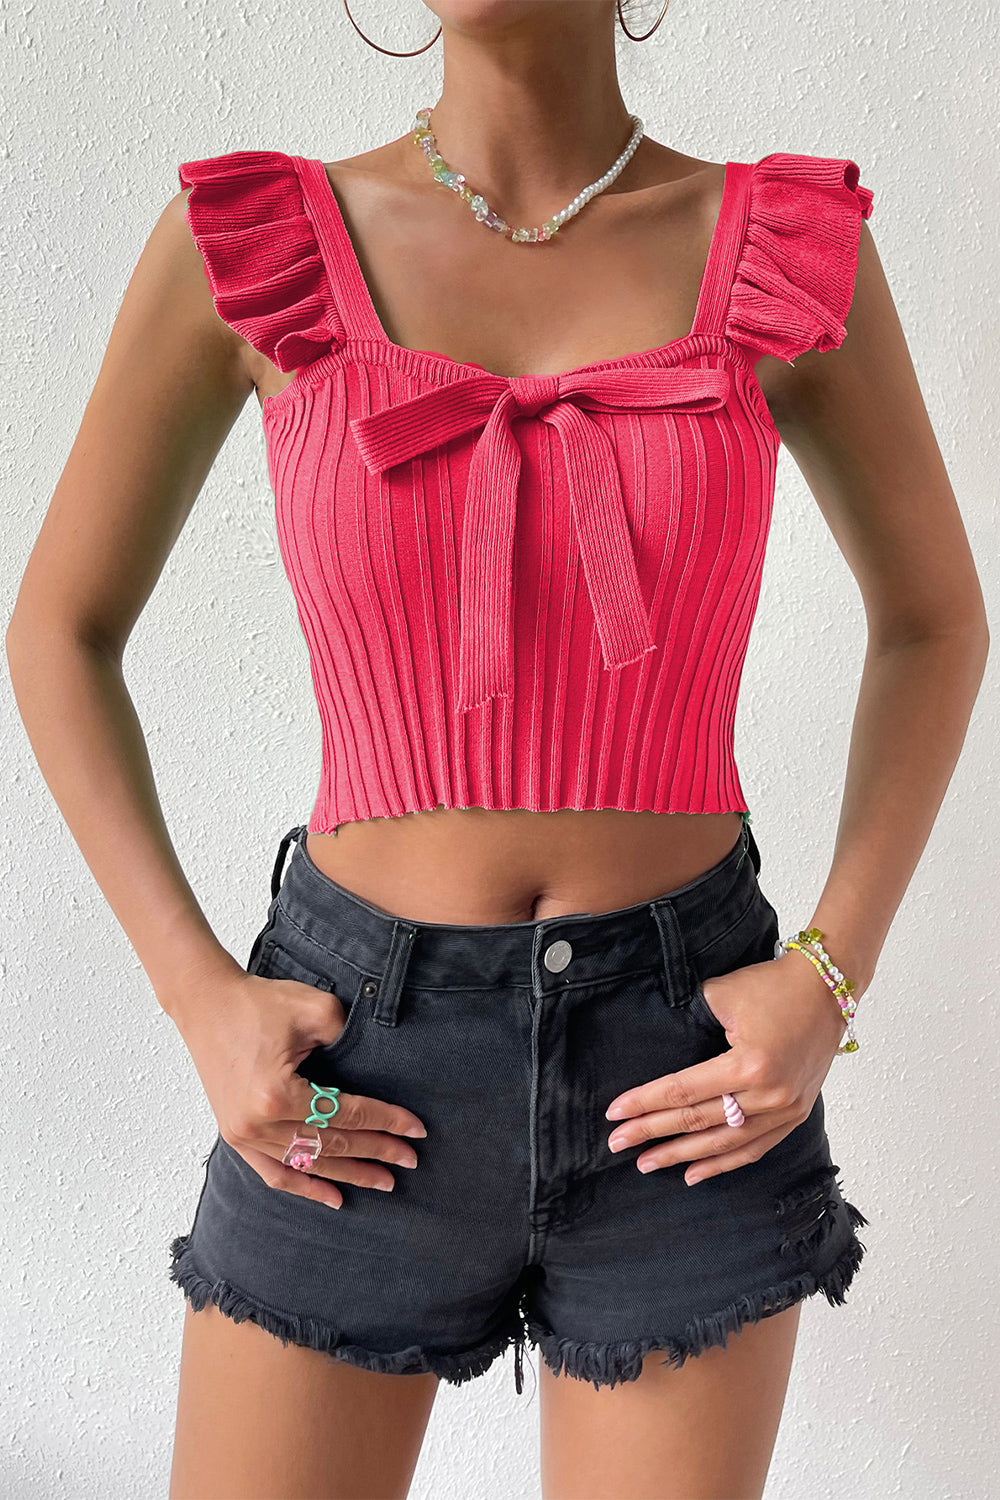 Square Neck Tie Front Knit Top - Pink / S - Tops & Tees - Shirts & Tops - 13 - 2024